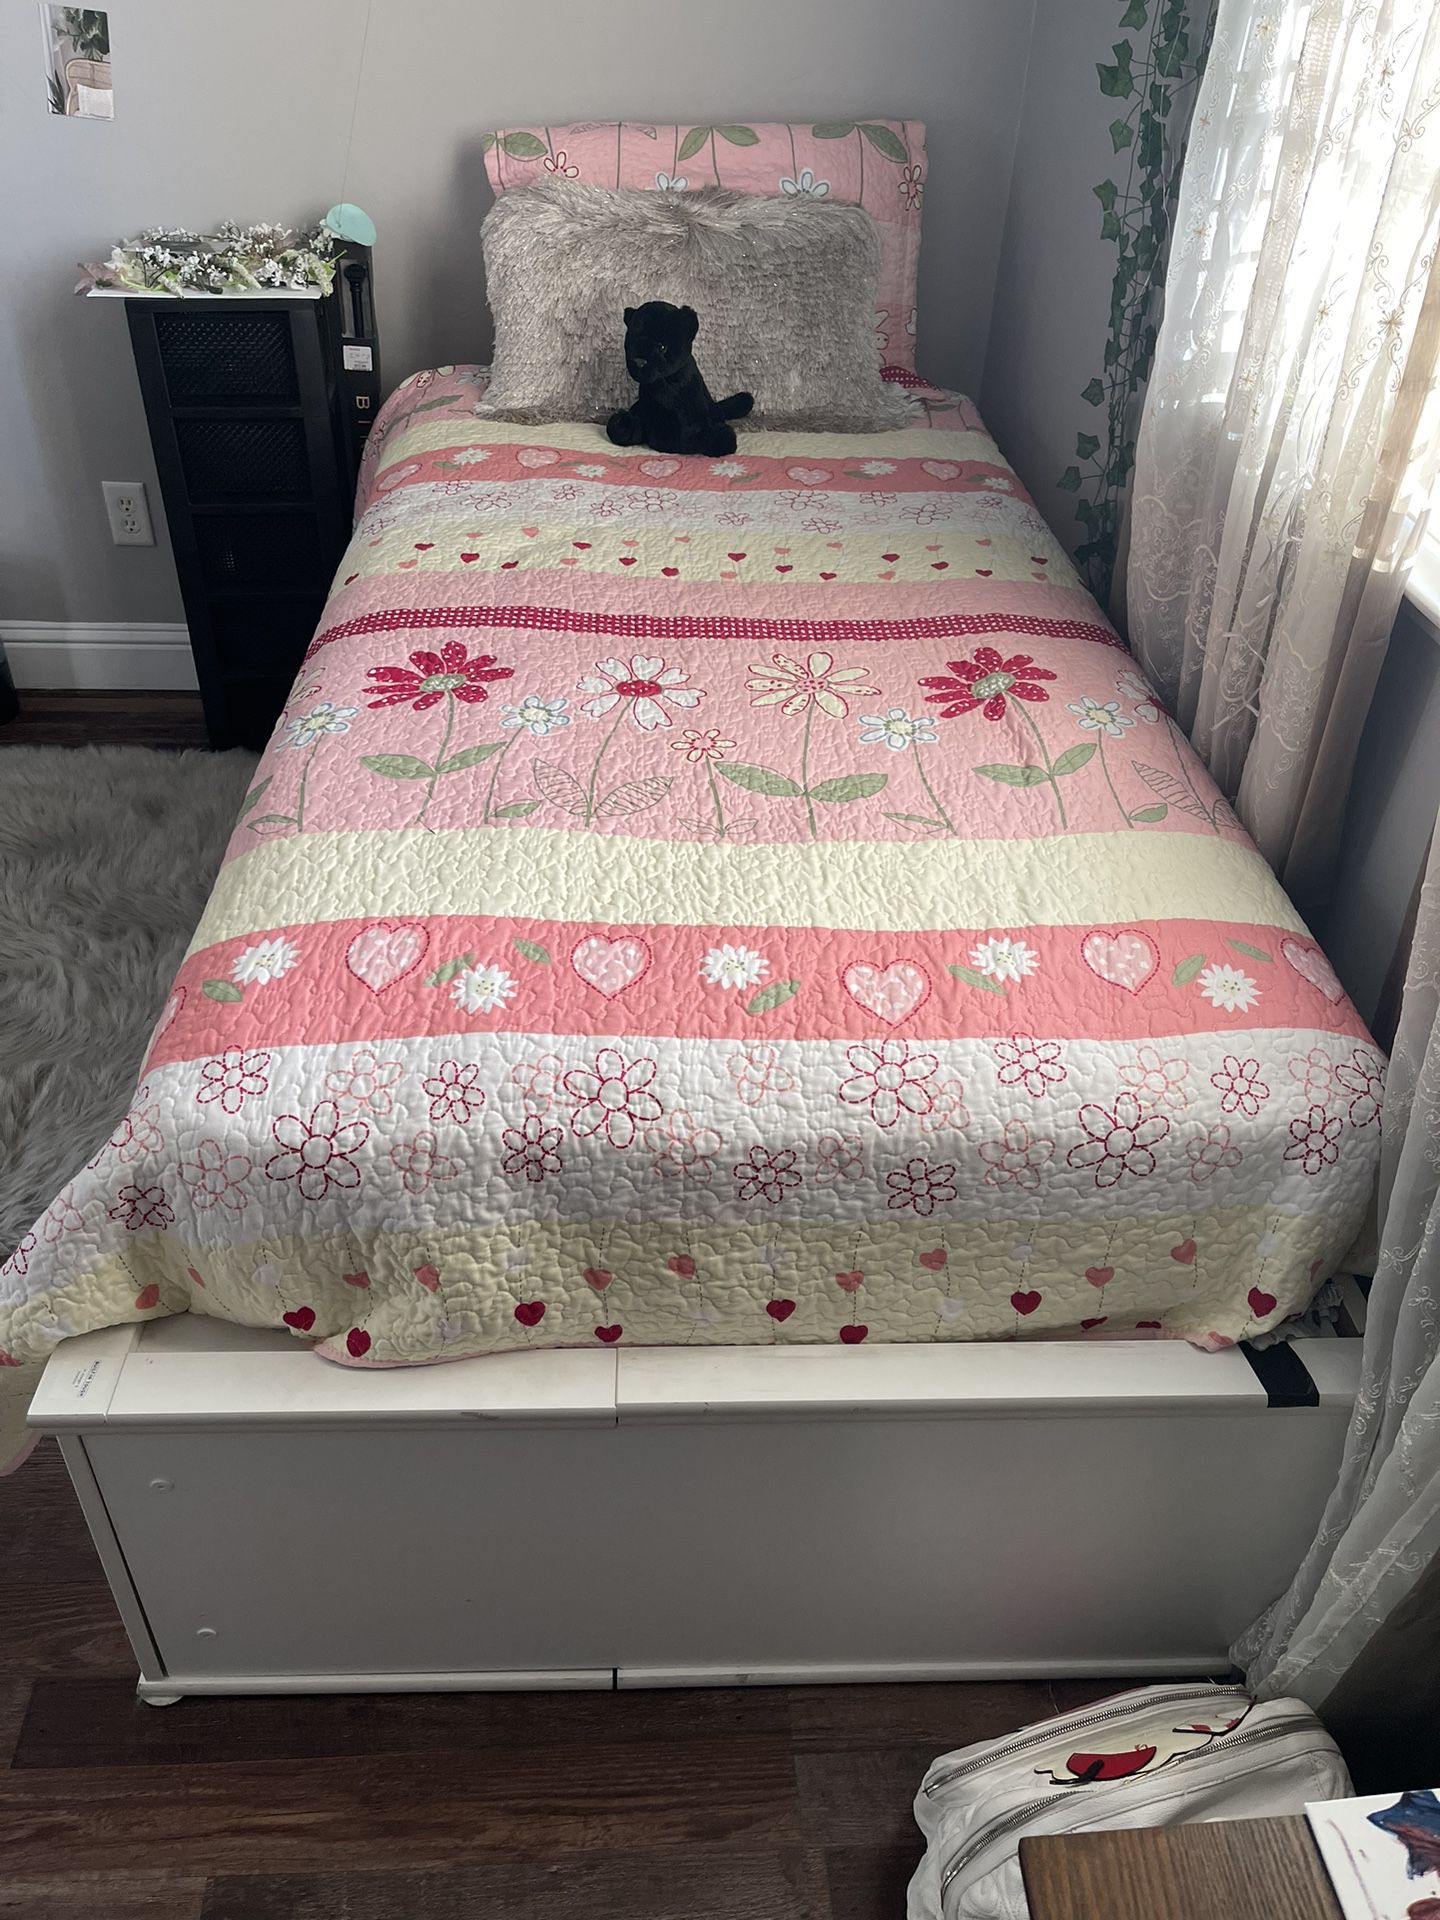 Twin Bed With Headboard And Mattresses 